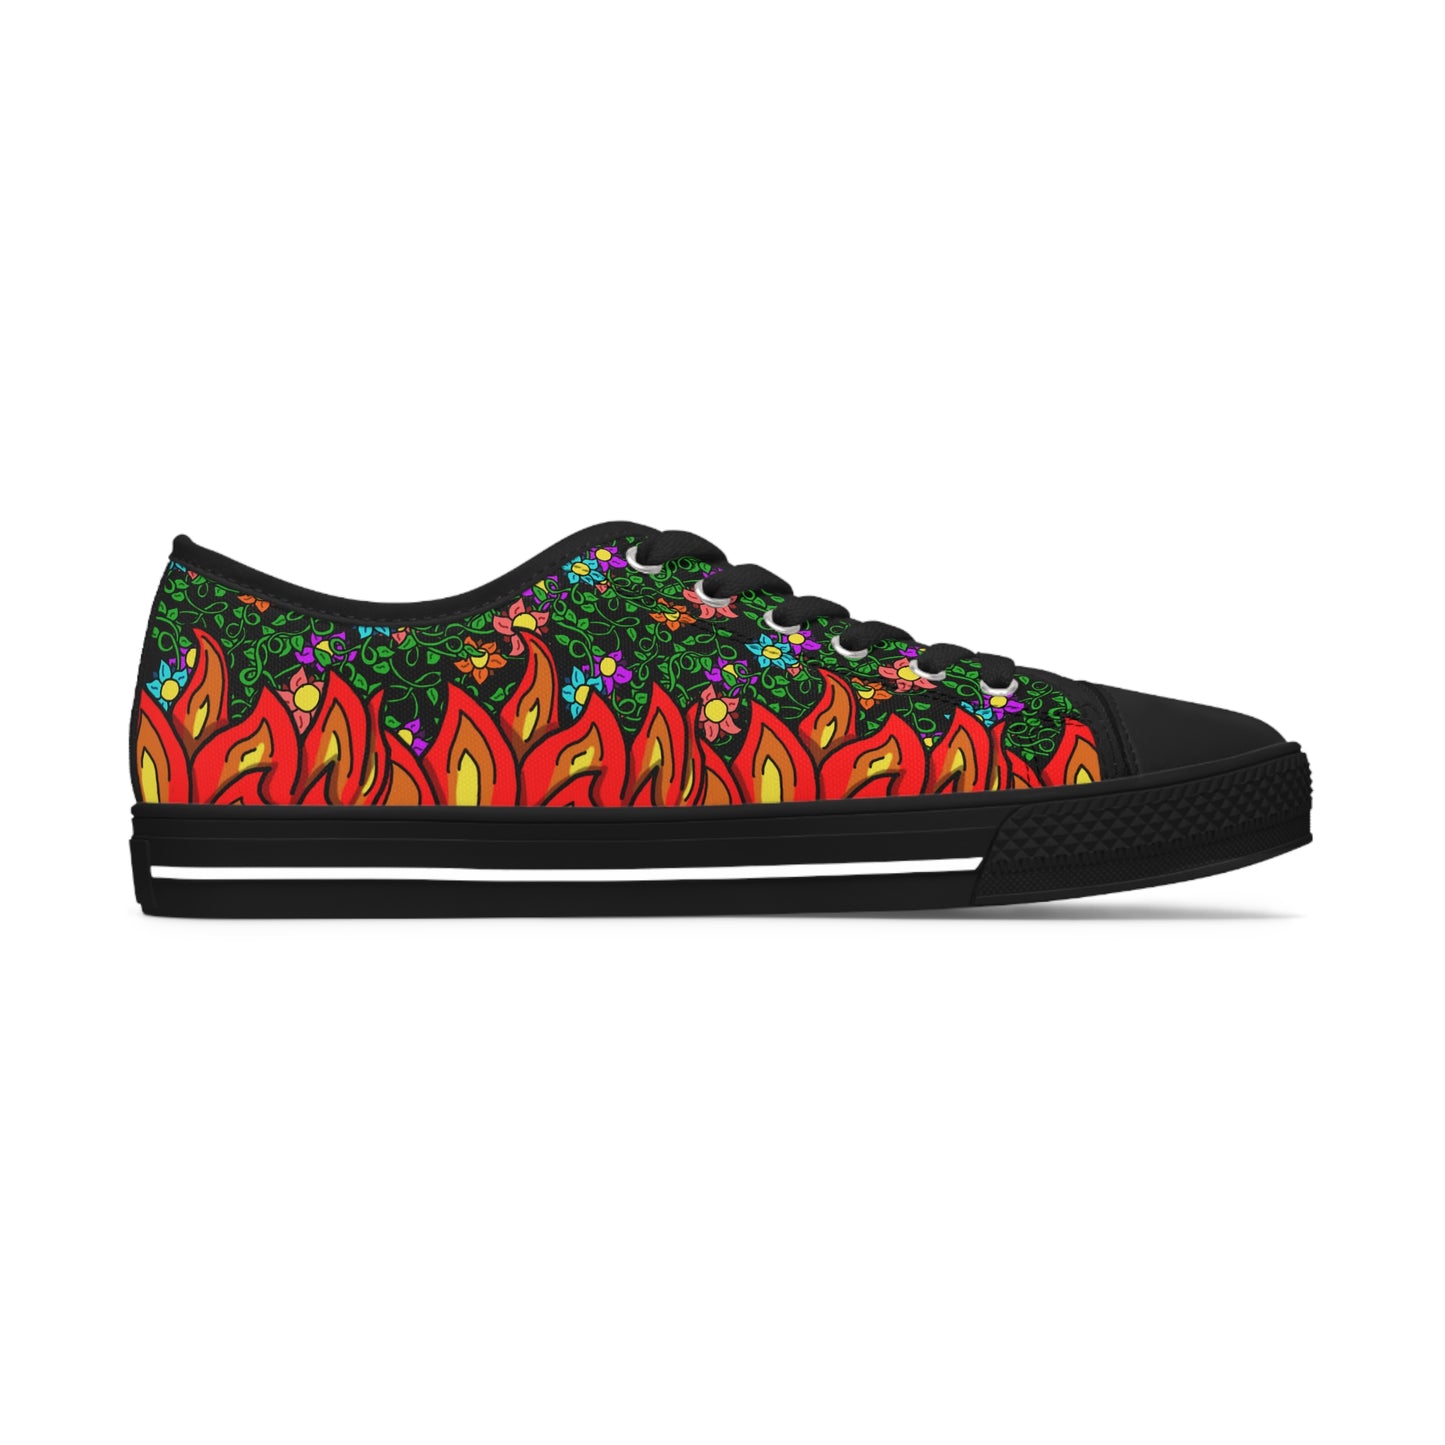 Flames & Florals Sneakers